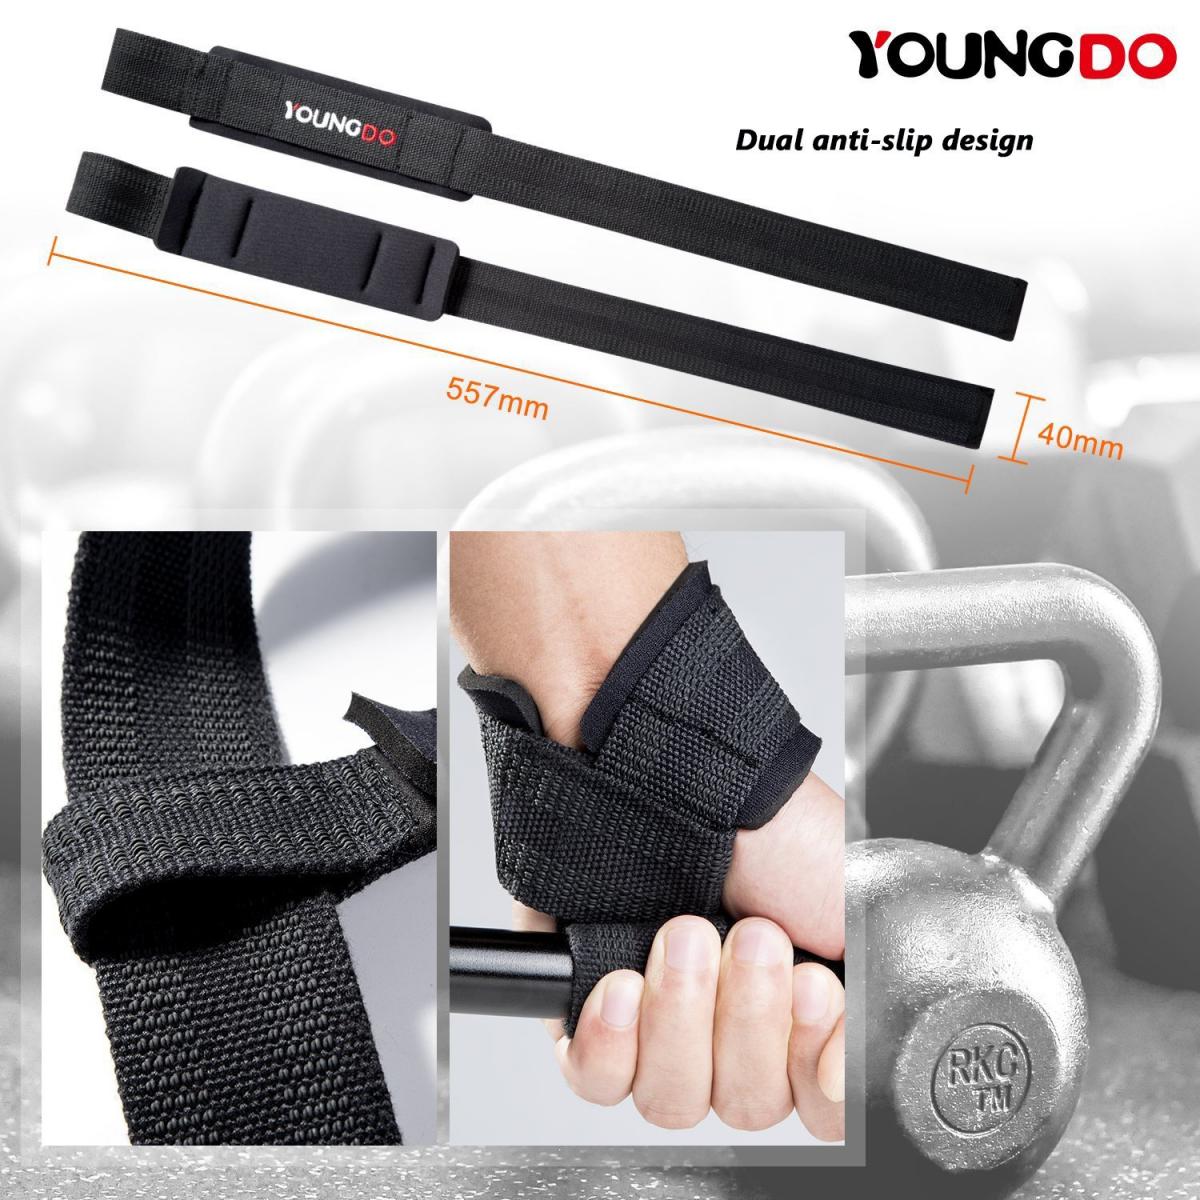 BOOM Padded Wrist Wraps Weight Lifting Training Neoprene Gym Straps Support Grip 